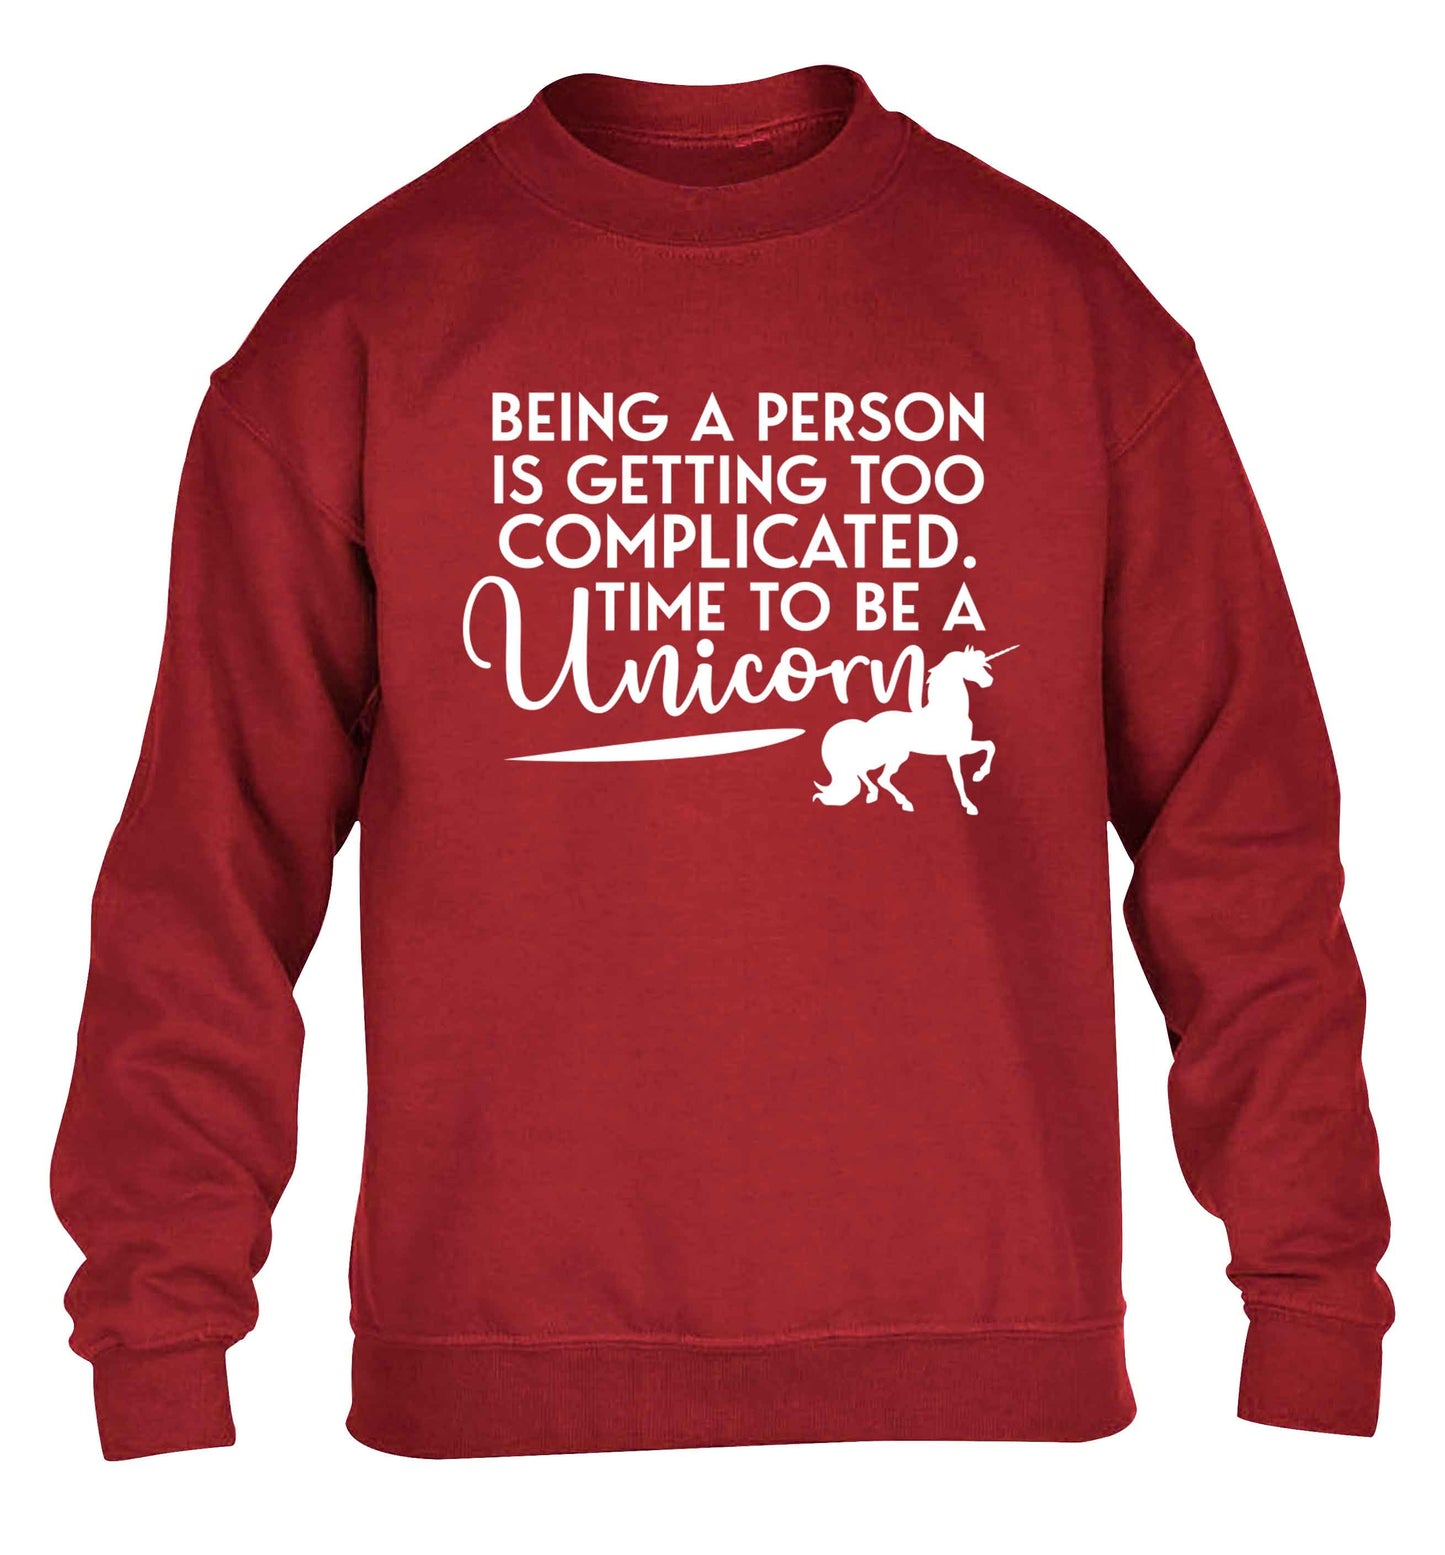 Being a person is getting too complicated time to be a unicorn children's grey sweater 12-13 Years